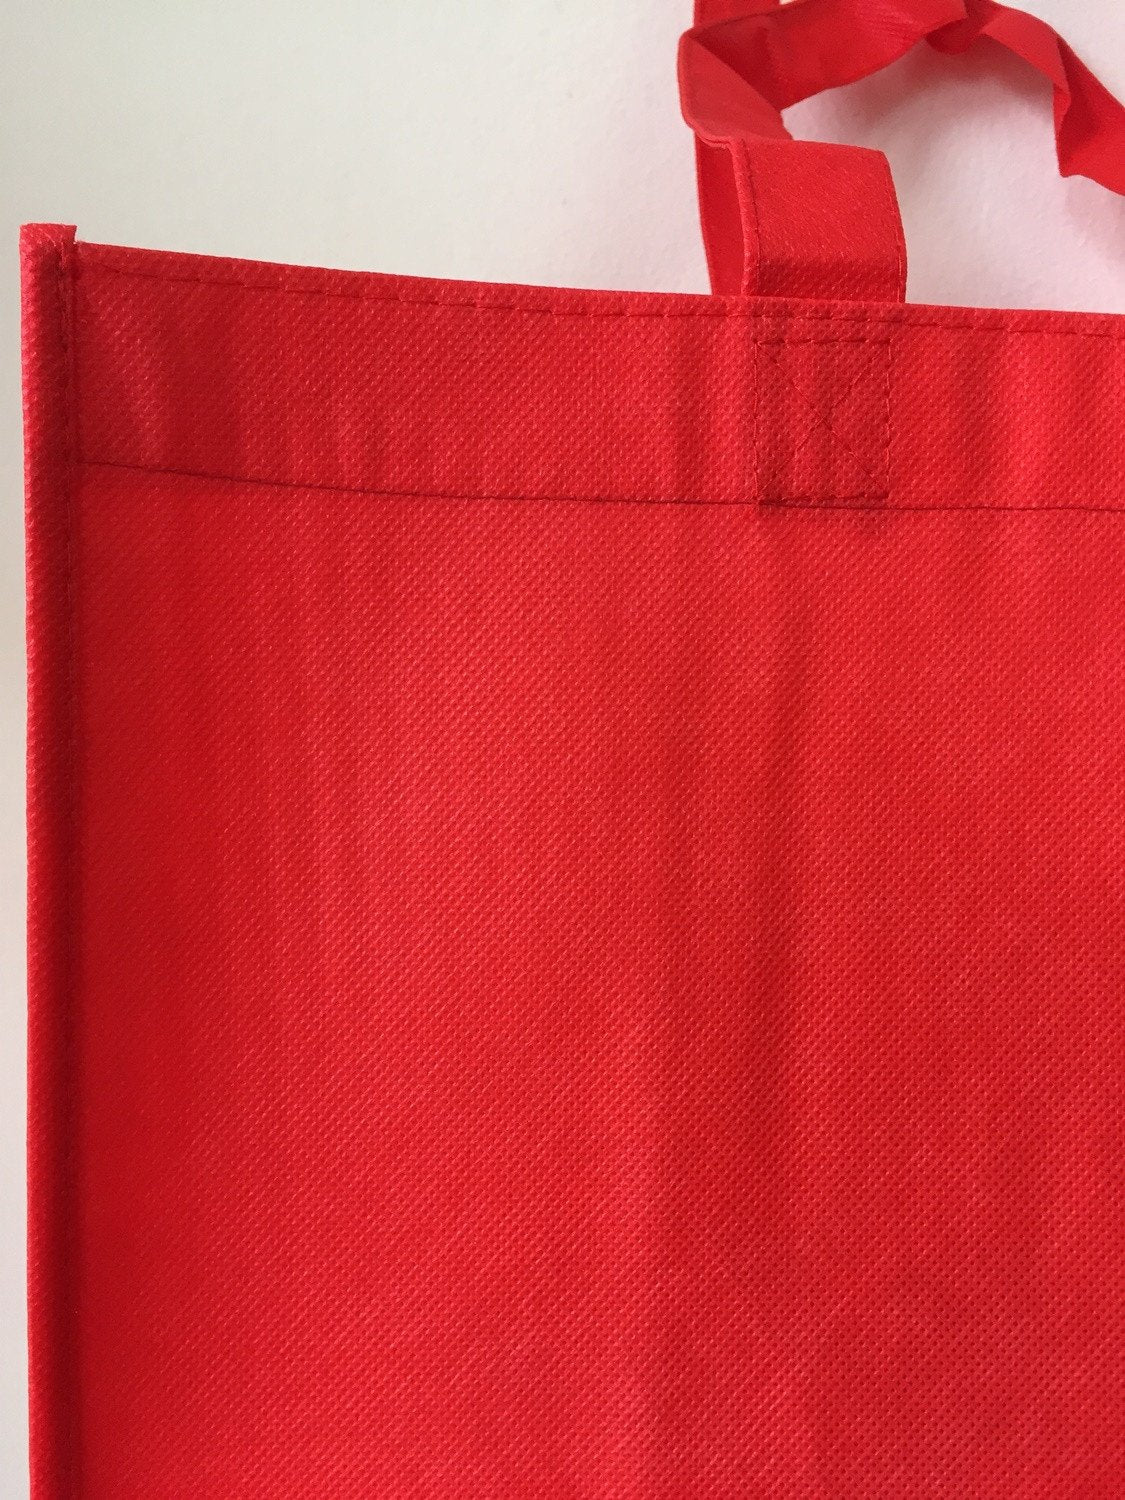 Reusable Red Grocery Tote Bags